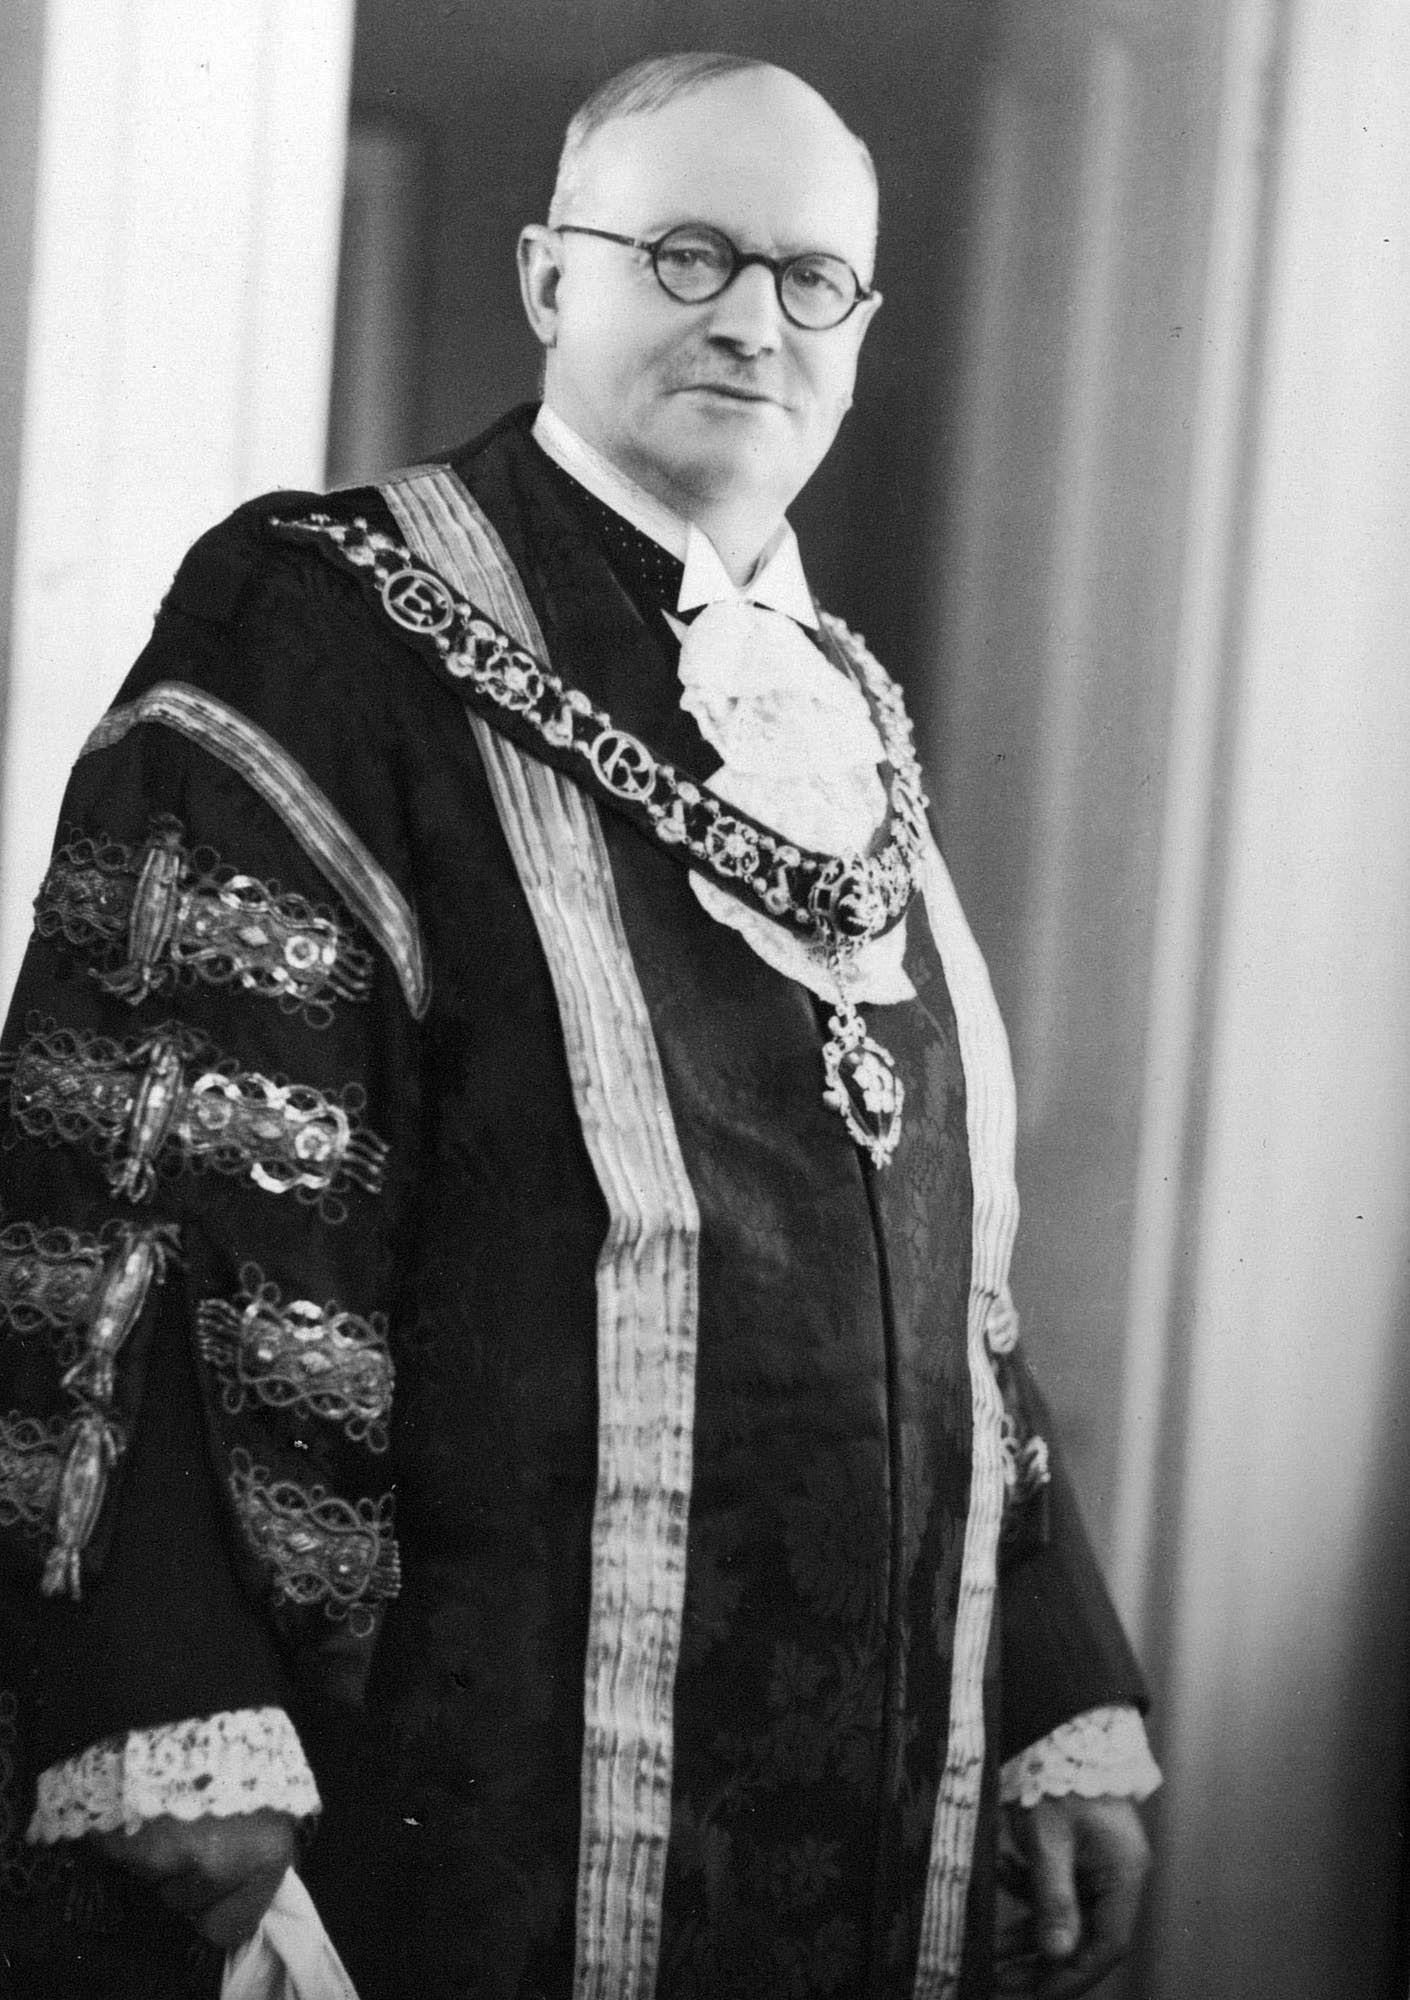 Lord Mayor, Councillor Frank Acton, who opened the building in 1938 -